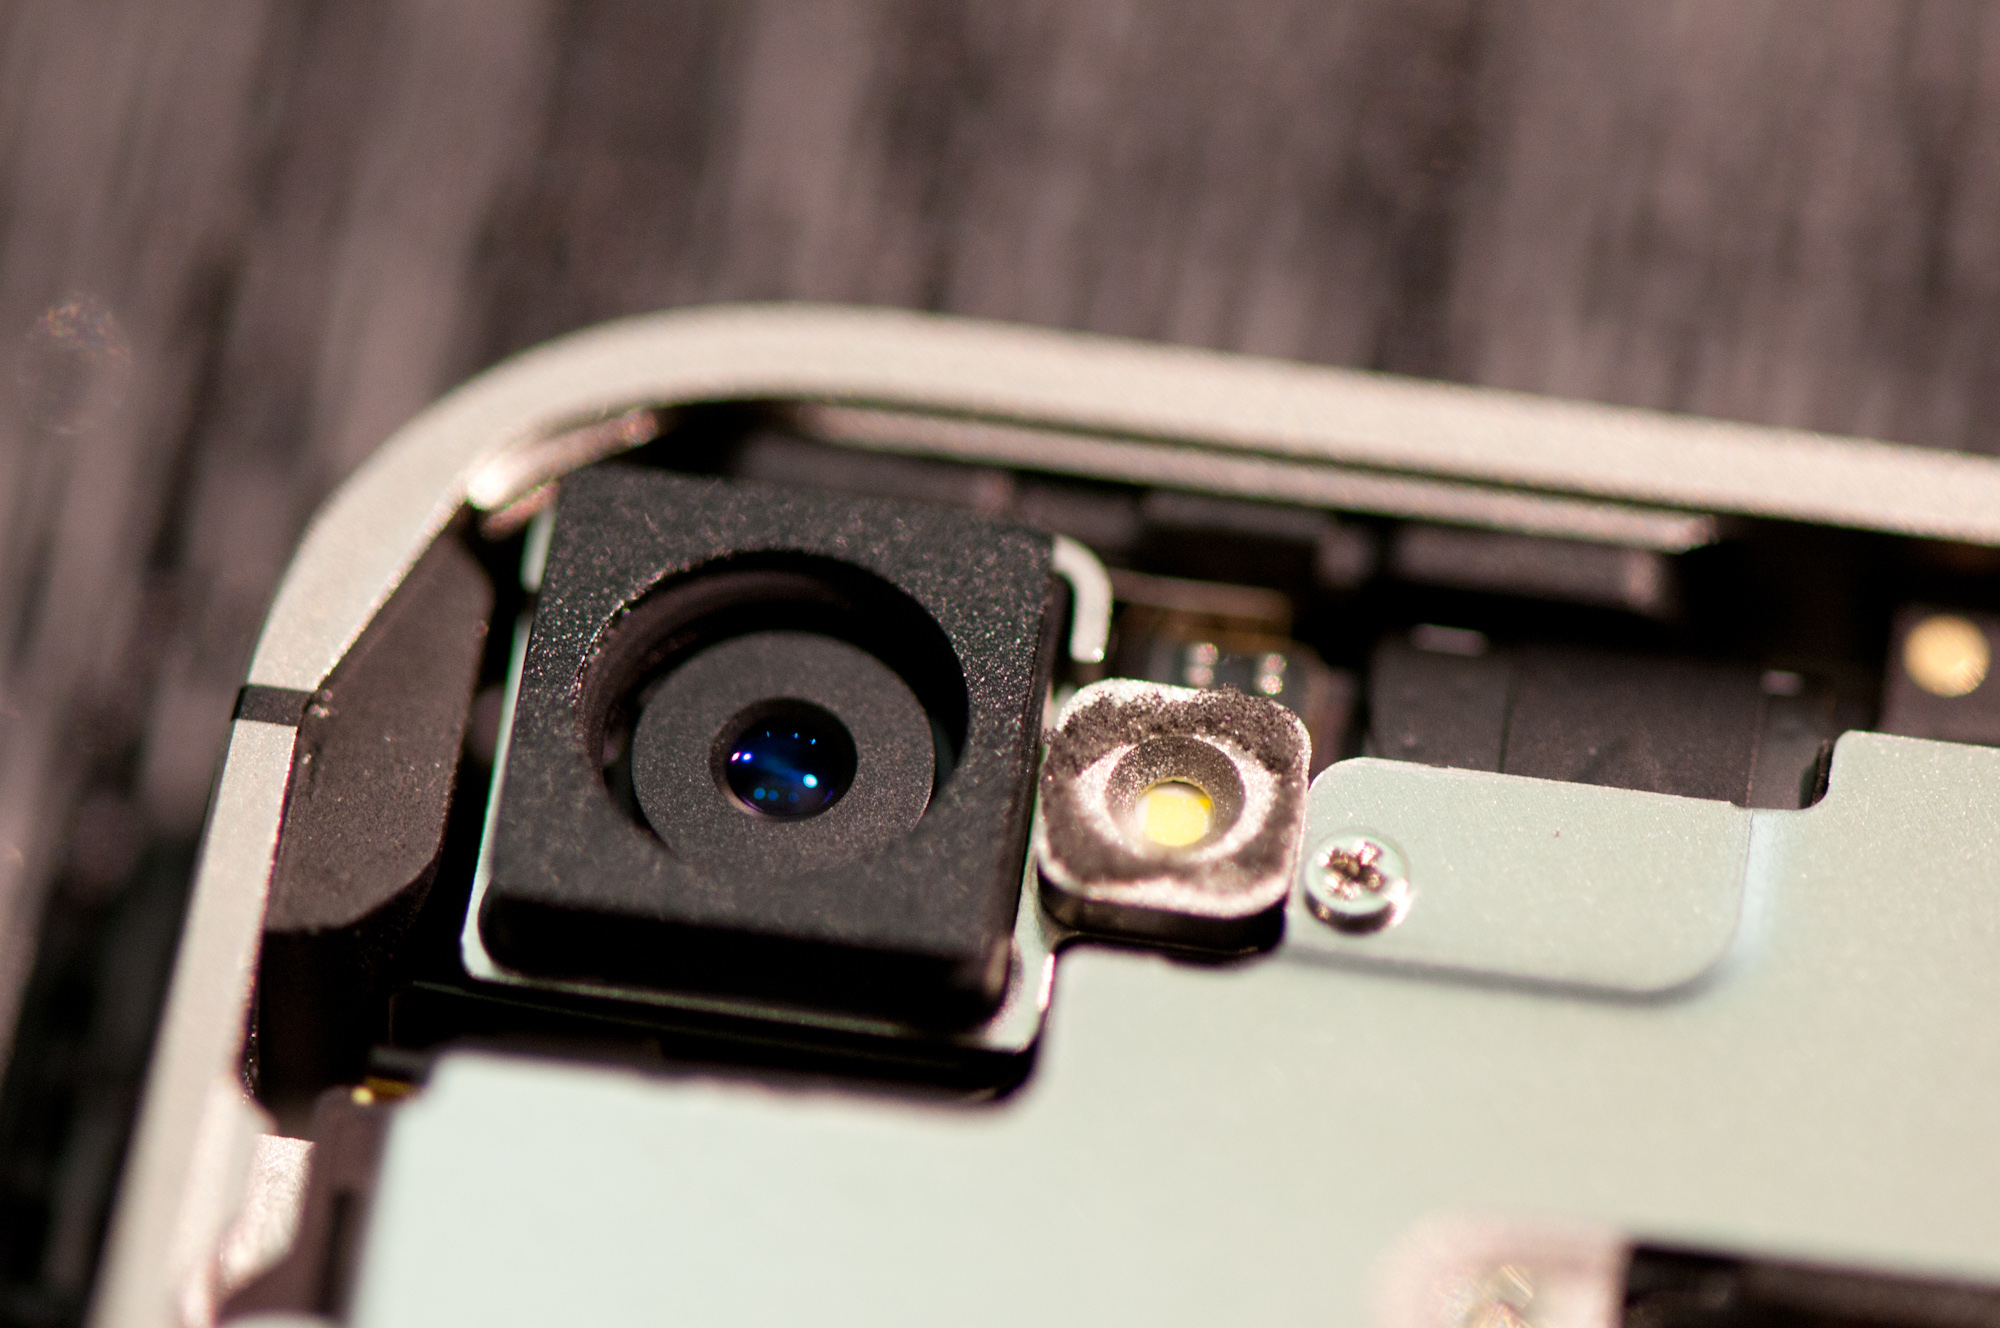 Camera Improvements - Apple iPhone 4S: Thoroughly Reviewed